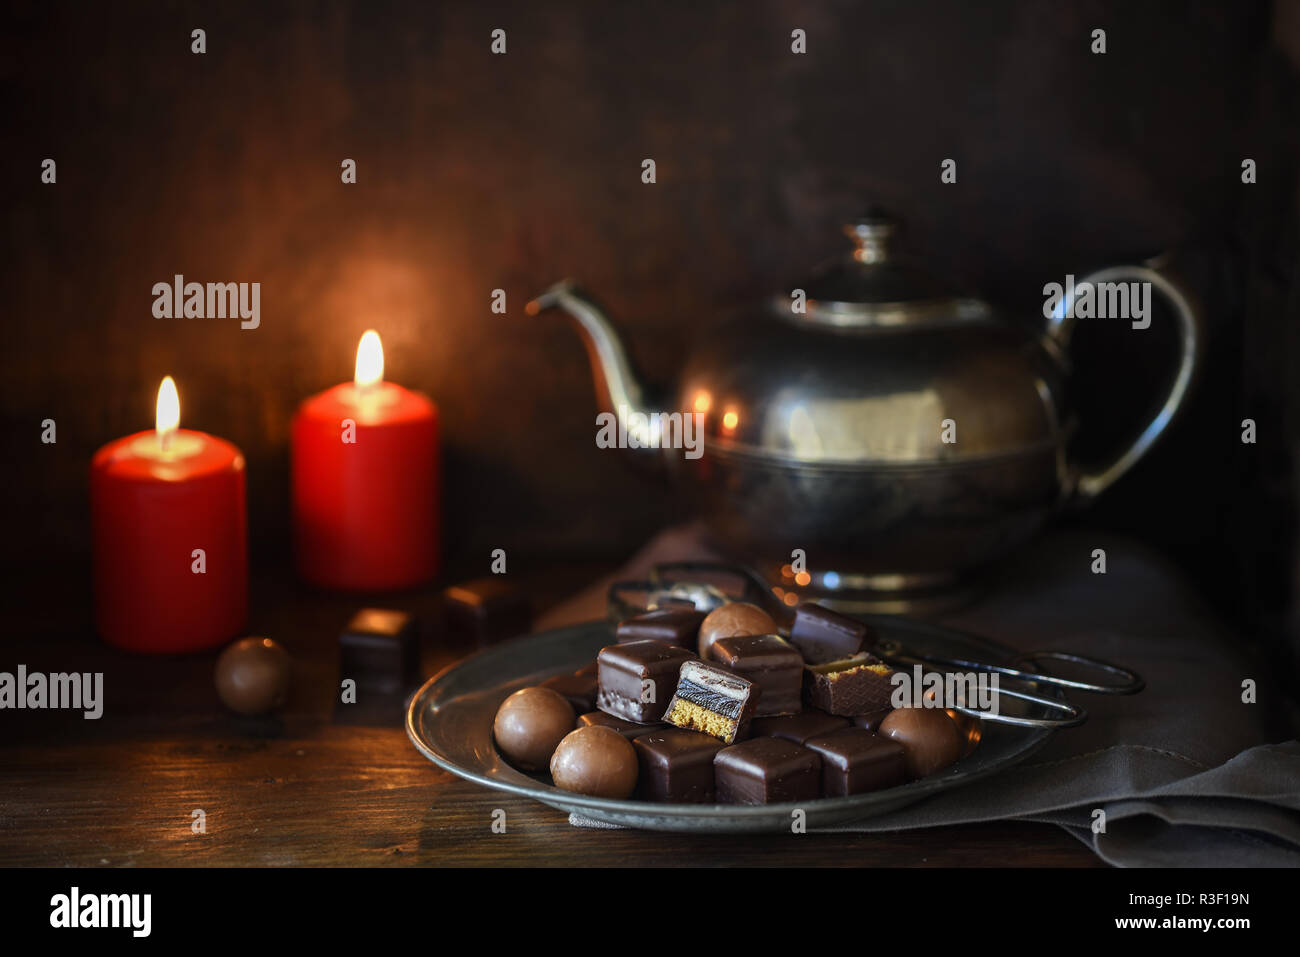 christmas chocolate sweets, two red candles and a silver teapott on a rustic wooden table, dark moody background, selected focus, narrow depth of fiel Stock Photo